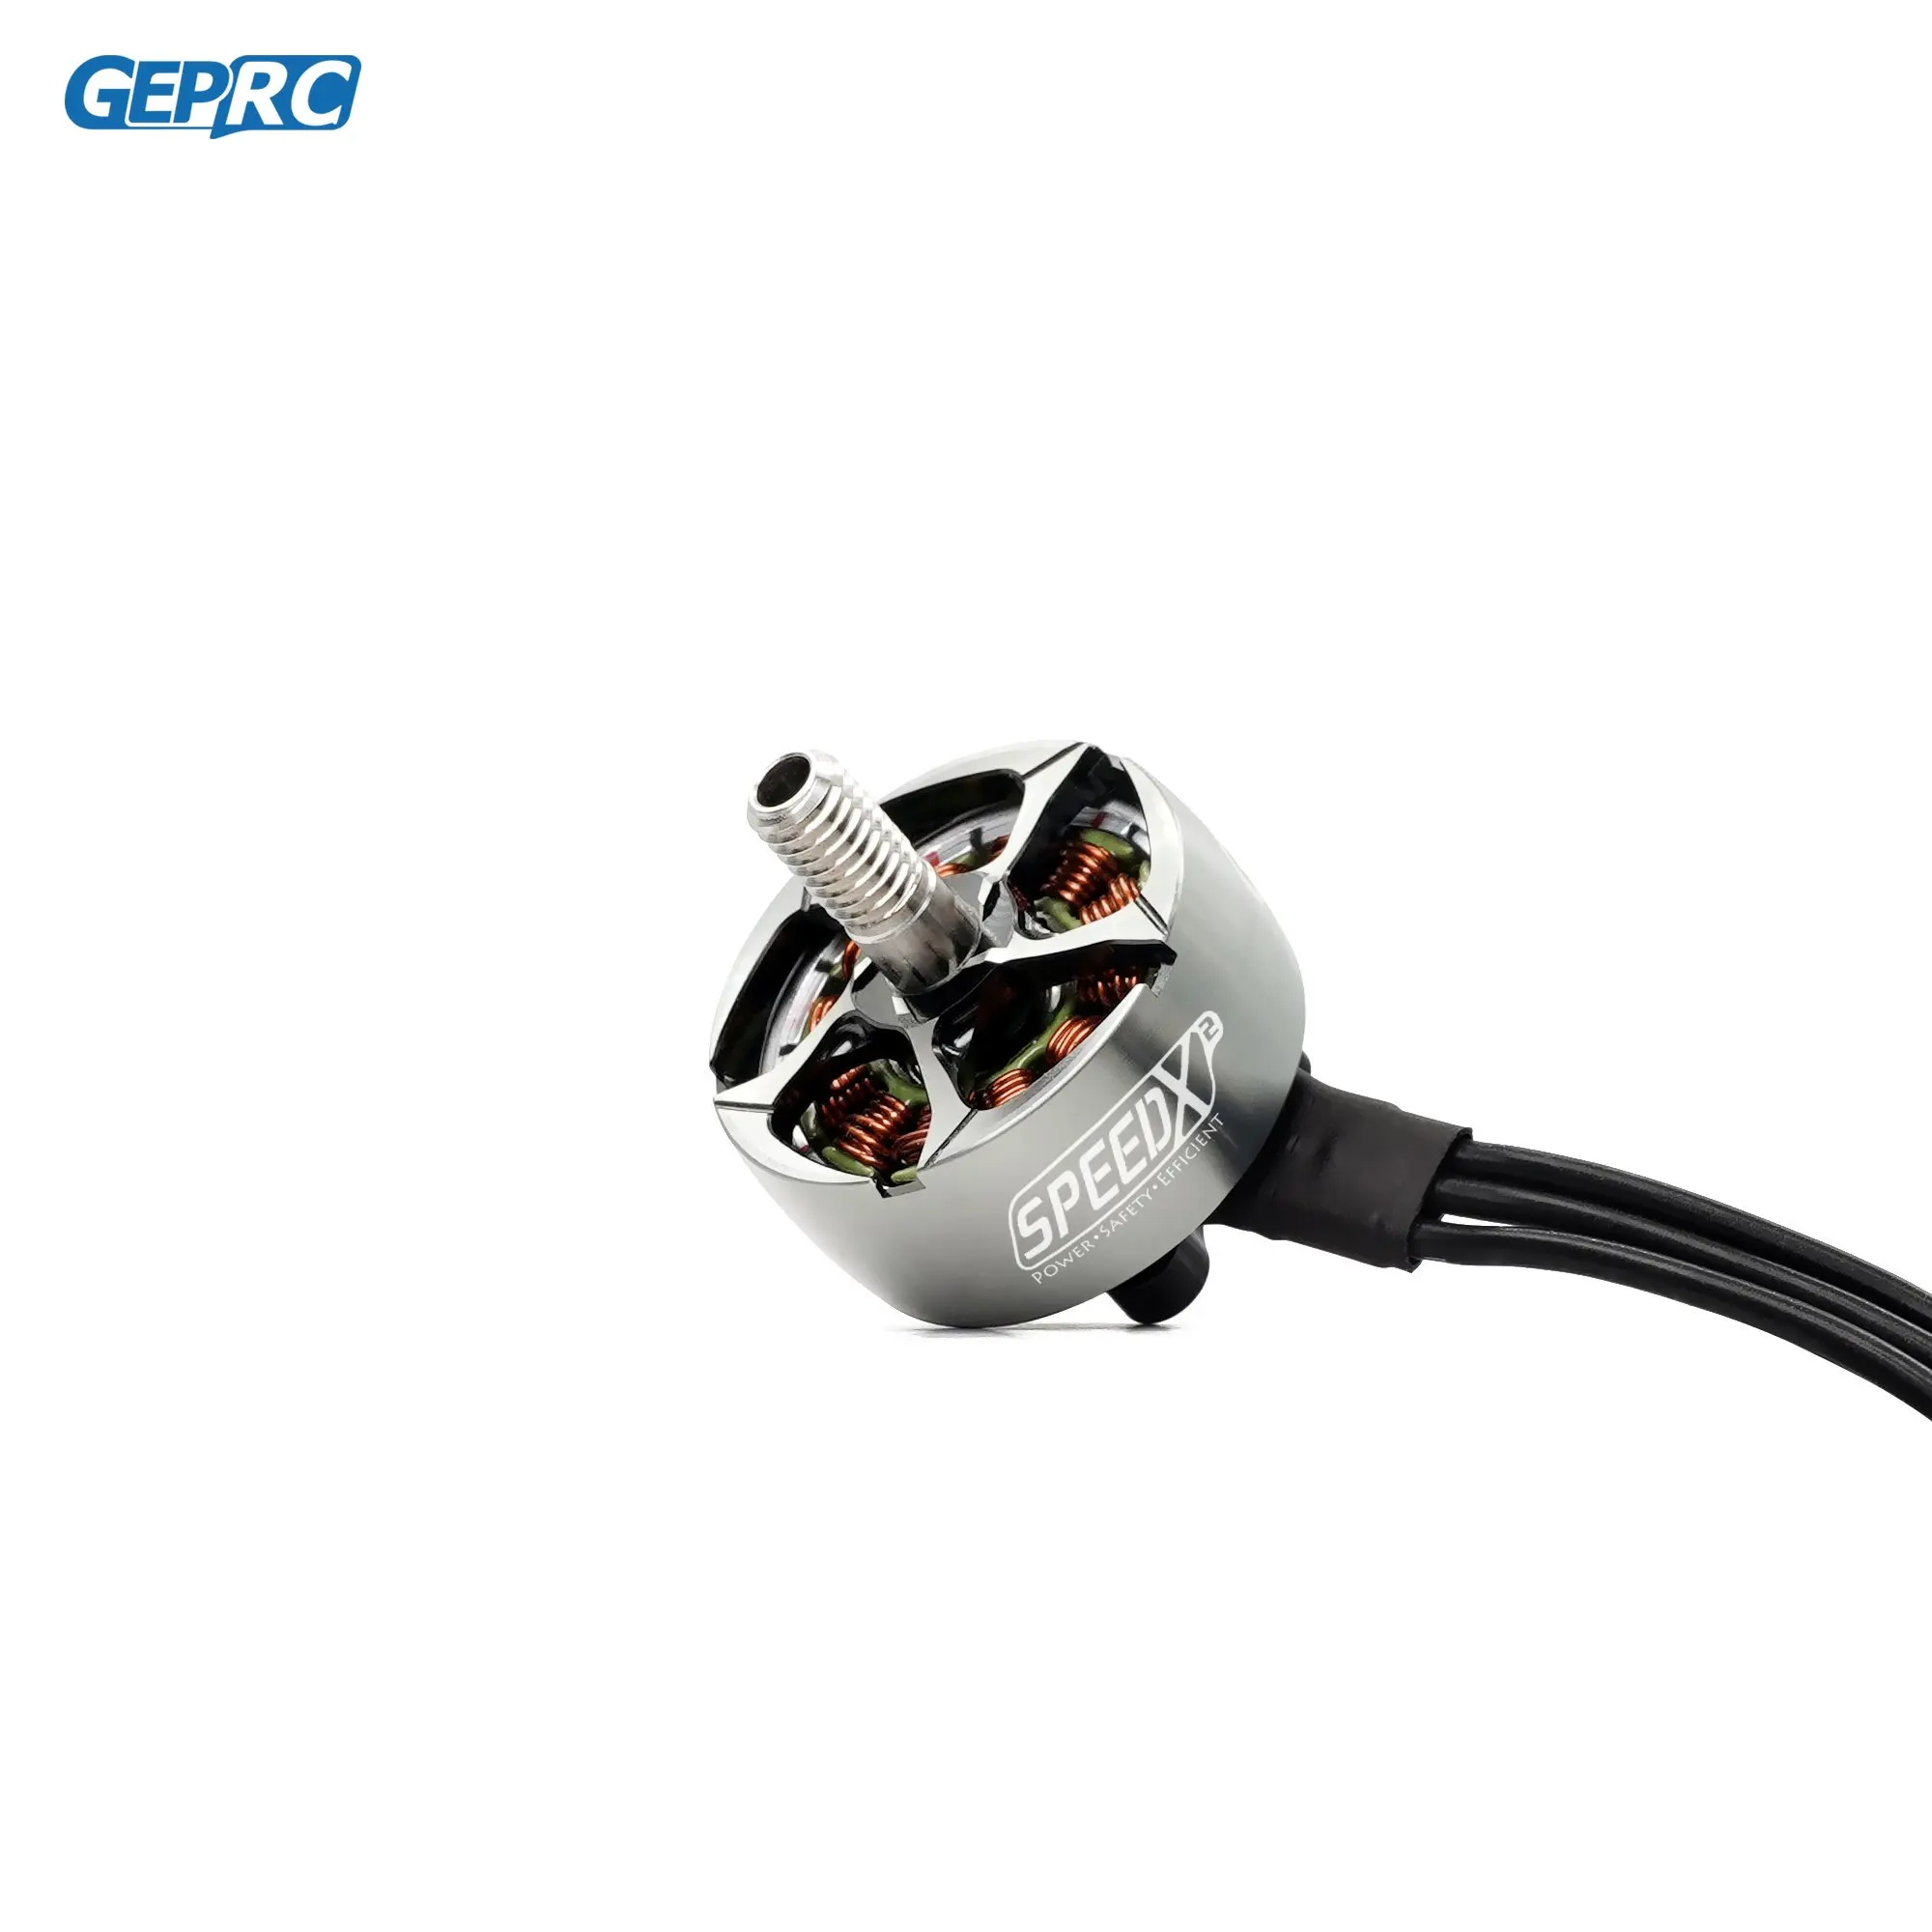 GEPRC SPEEDX2 2107.5 1960KV/2450KV Motor Suitable For DIY RC FPV Quadcopter Freestyle Racing Drone Accessories Replacement Parts 2